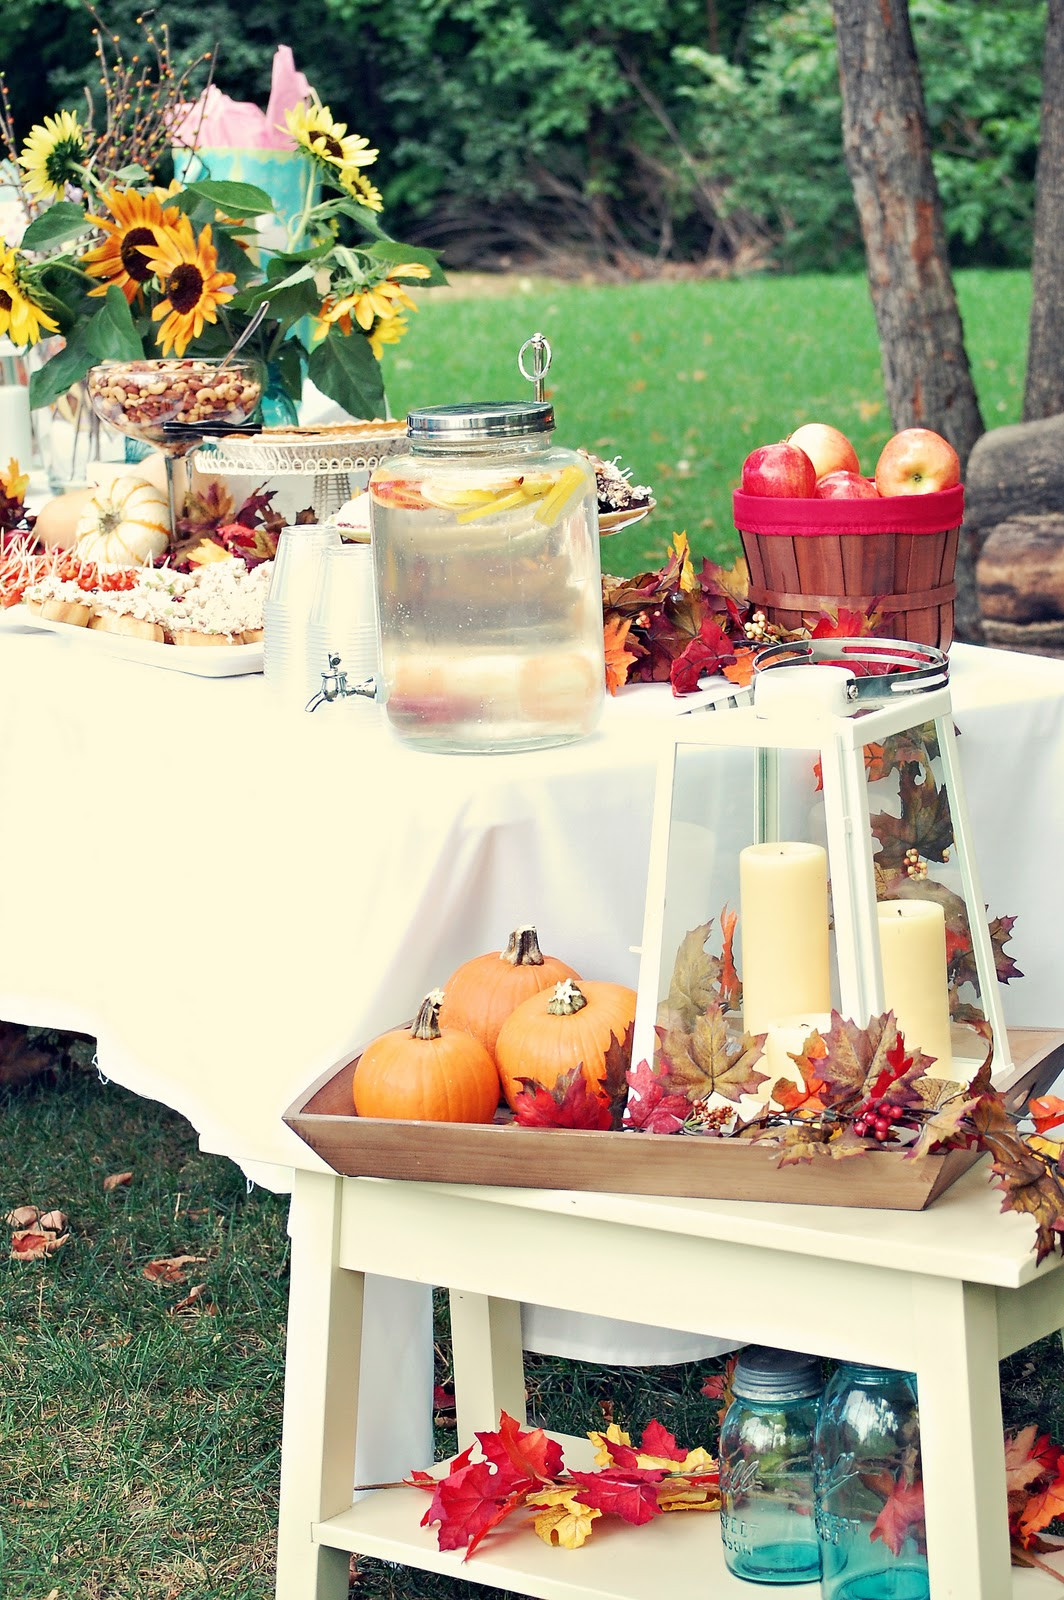 Autumn Baby Shower Ideas
 A Feathered Nest Fall Baby Shower